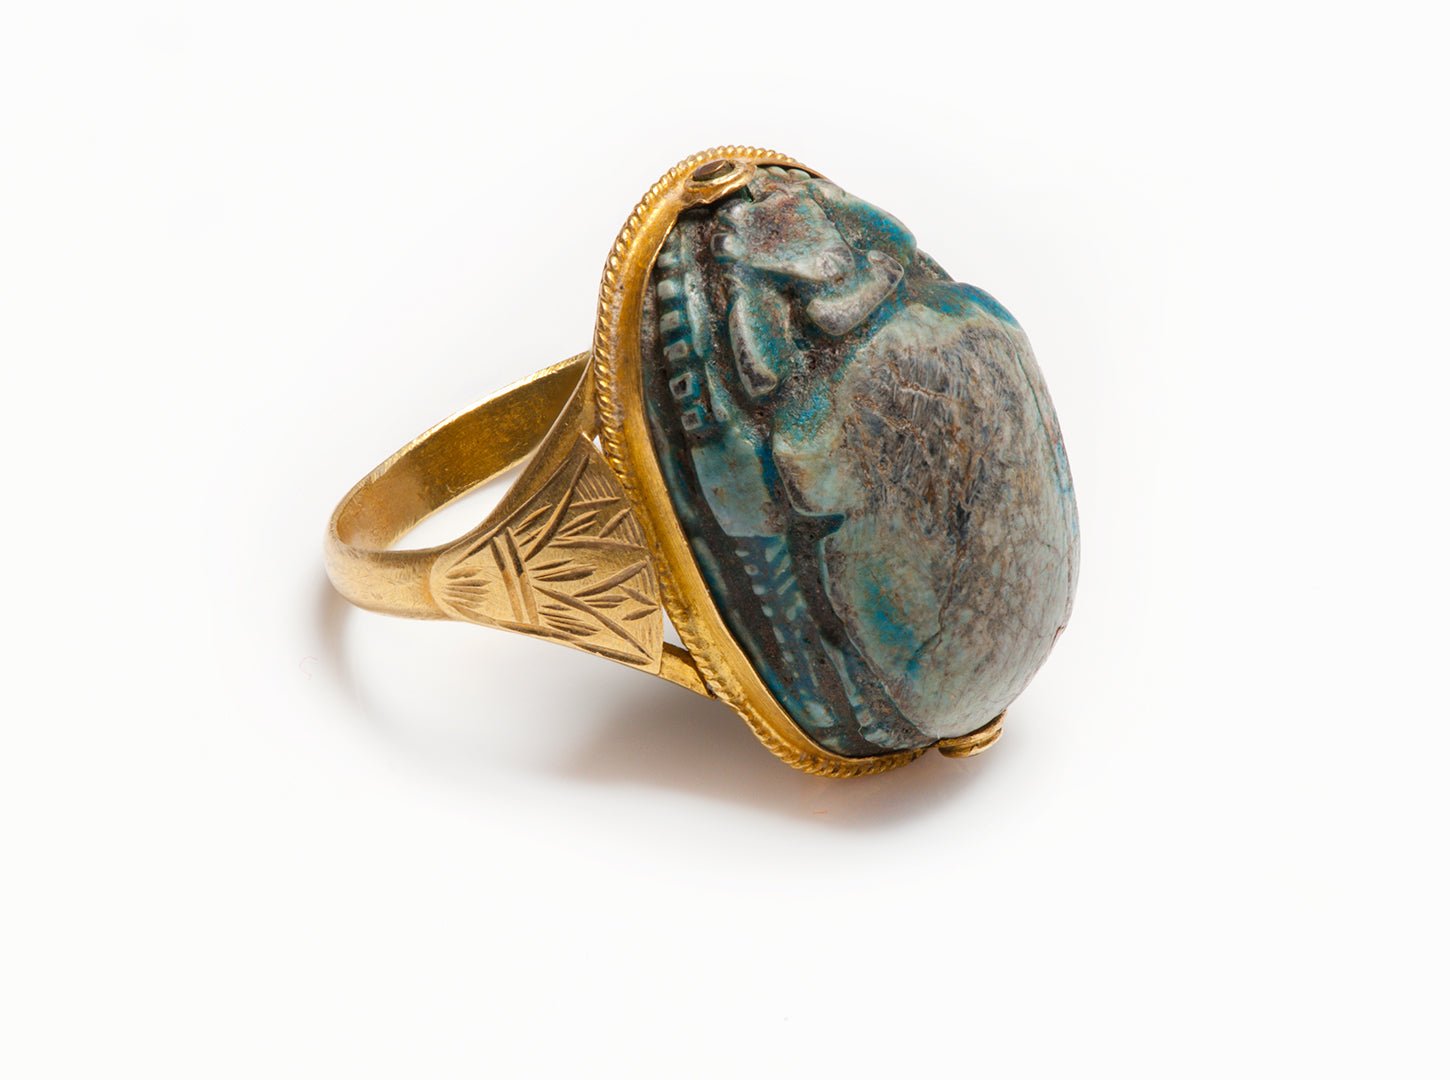 Antique Egyptian Revival Gold Papyrus Scarab Ring